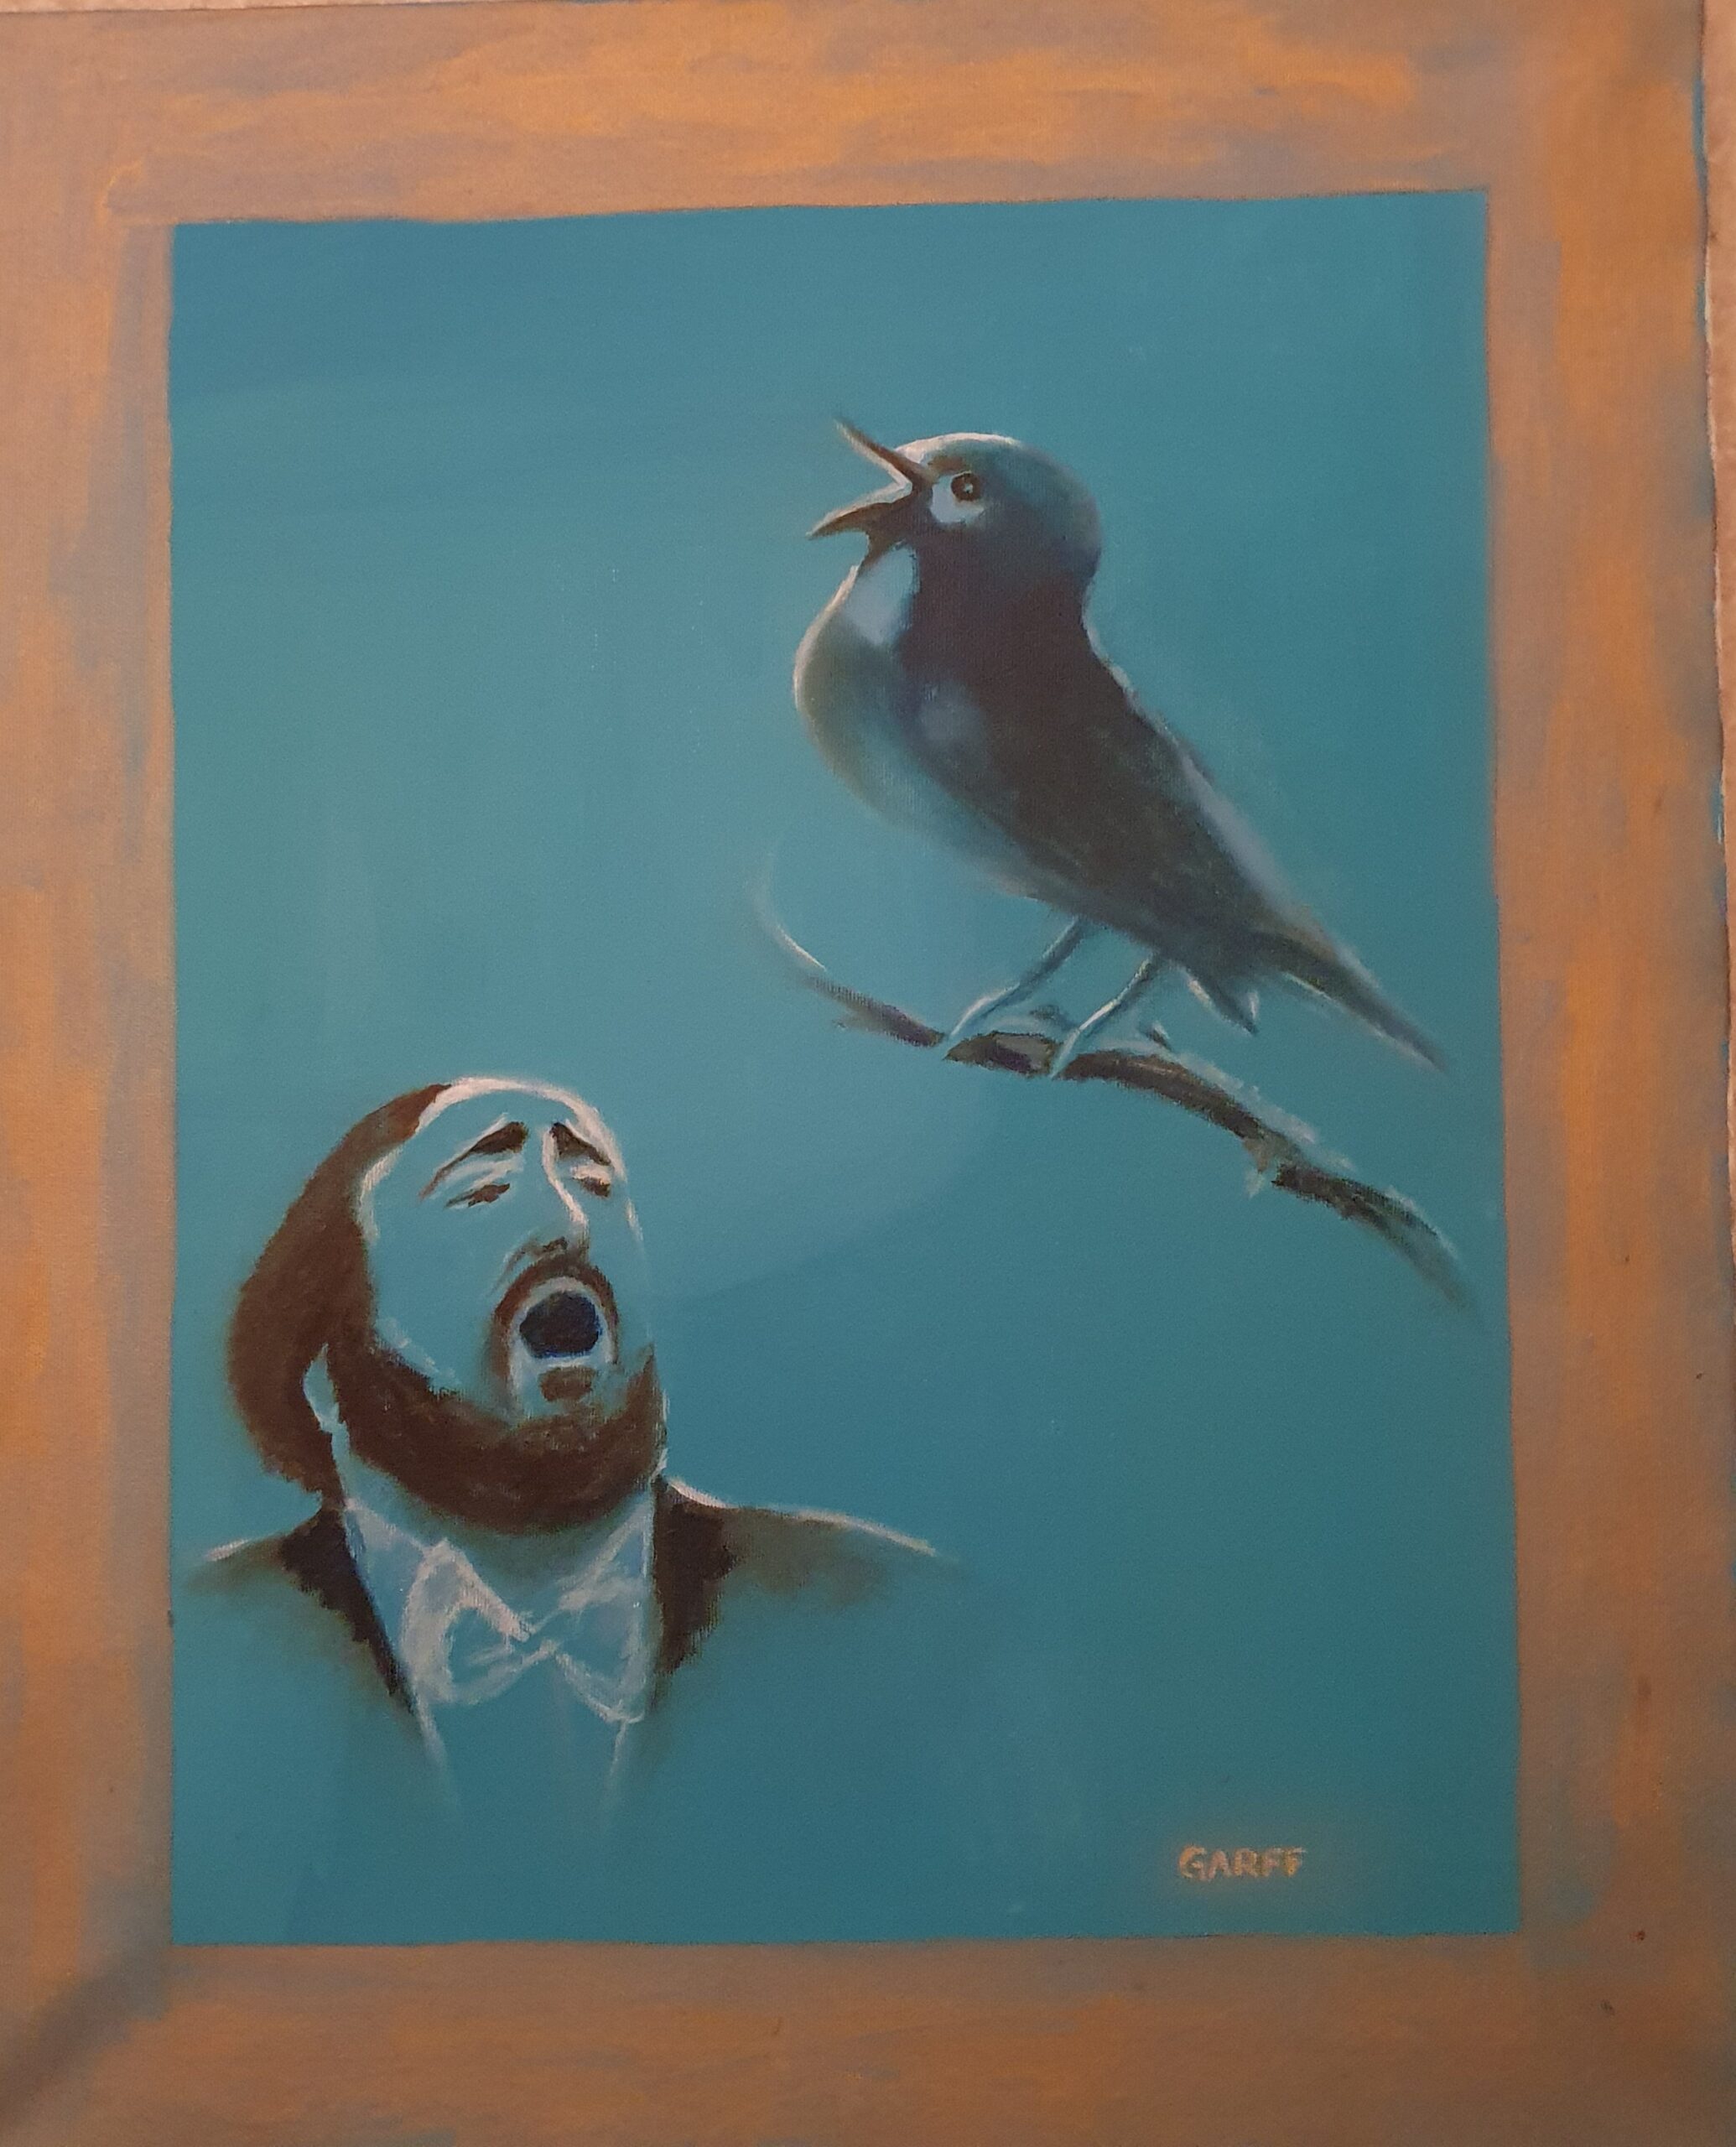 
The singing bird recognizes the master's voice. 2004 was a particularly inspired year for Enrico Garff. His soul felt singing. During the same period, he painted a similar artwork in tune with the same theme: "Va' Pensiero". The author spontaneously burst out all his bliss while composing the masterpiece, a symphony vibrating a rejoicing aria. Music translated in shape and colours.             For the complete biography, you are more than welcome to browse Wikipedia.

To prevent any potential forgery a secret code known only to the owner is going to be provided to the buyer at moment of the purchase. The artwork belongs to the Baroness' Gripenberg Art Collection.